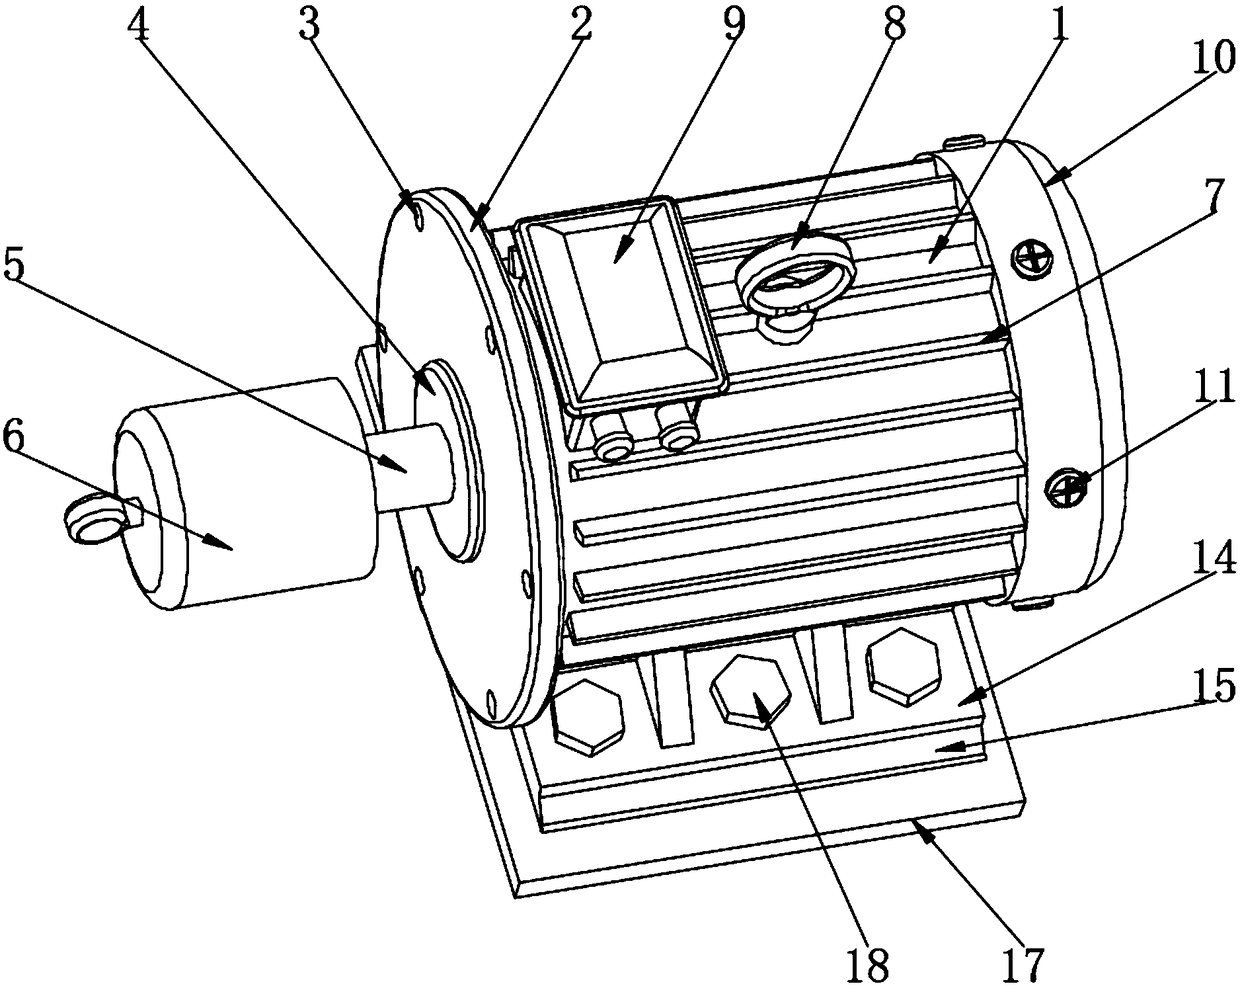 Motor with high application stability